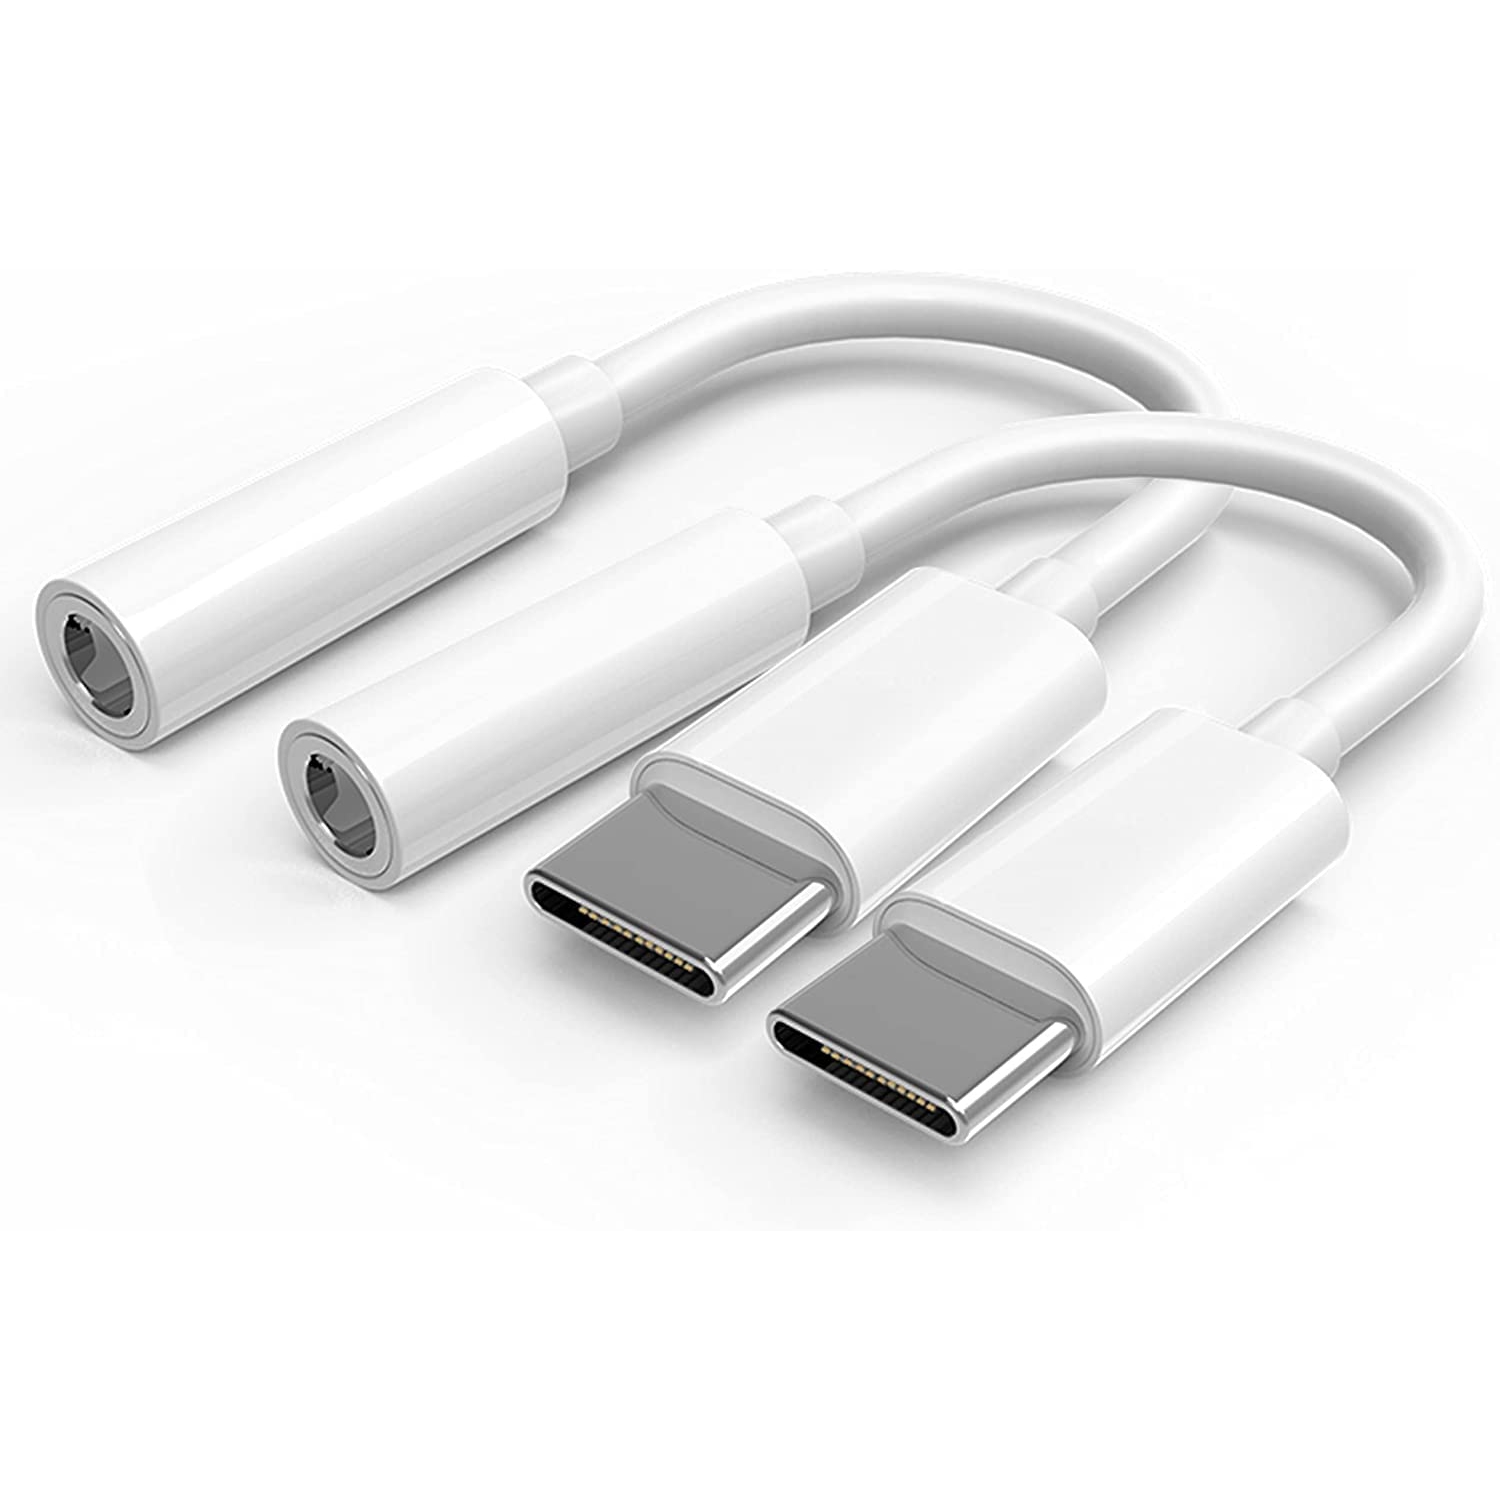 AA USB Type C to 3.5mm Female Headphone Jack Adapter (2-Pack),Aux Audio Cable Cord Compatible for All USB c Devices.